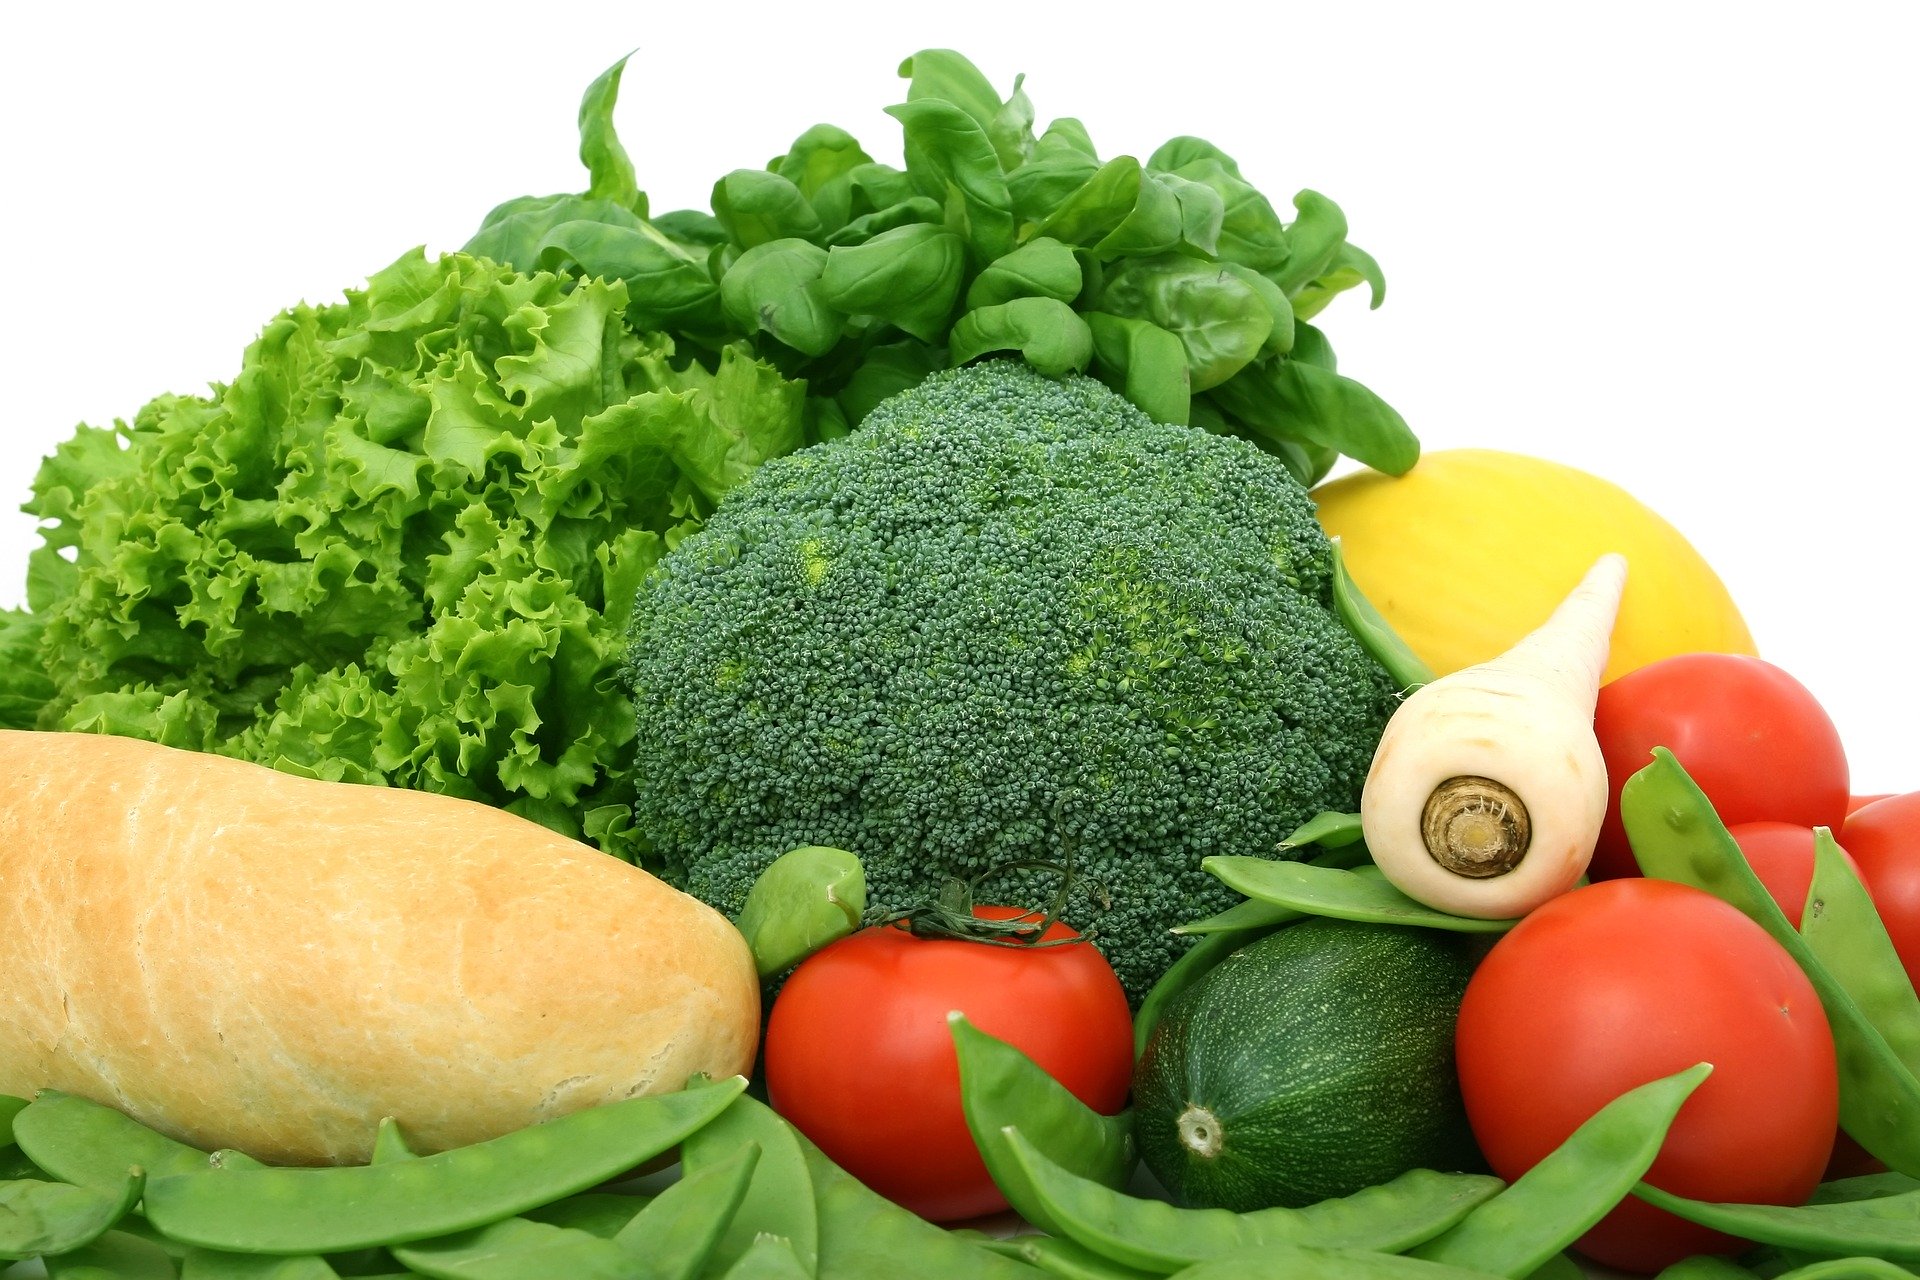 preparation helps optimize digestion of raw foods